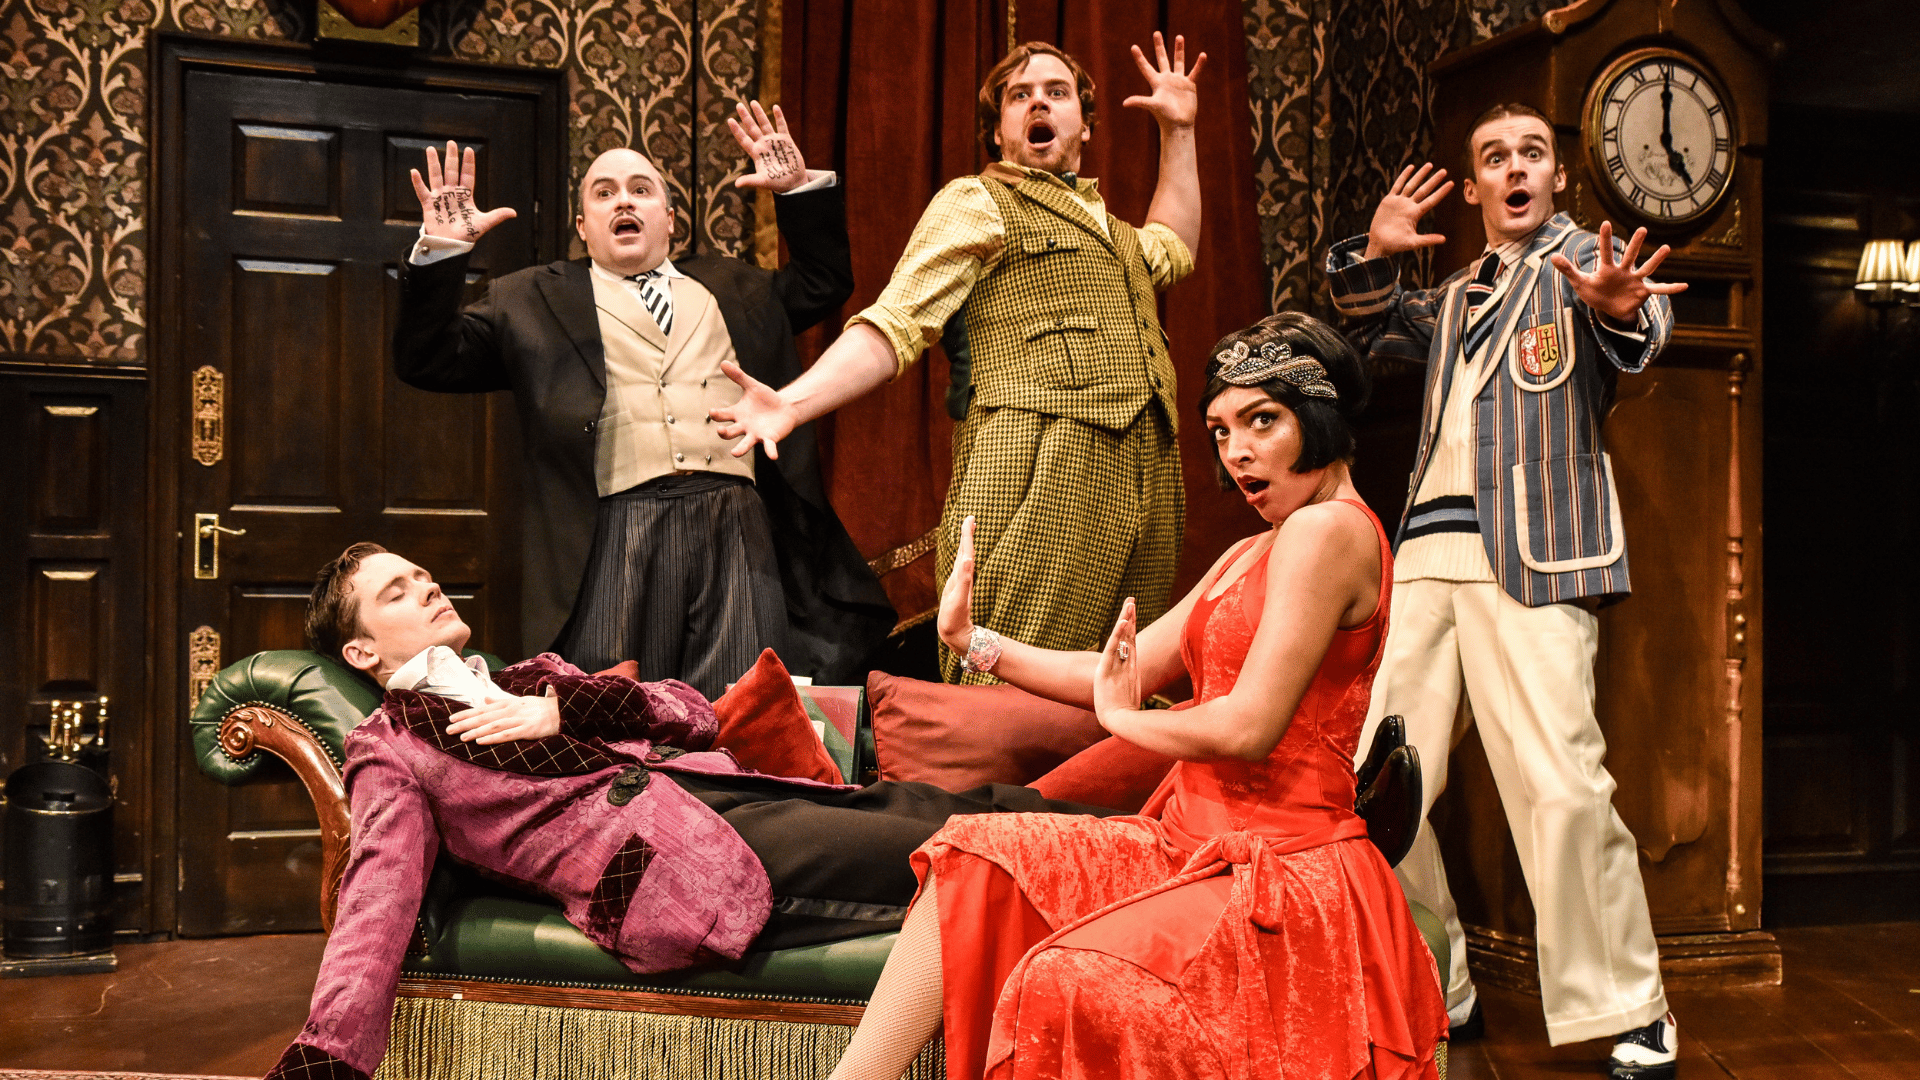 The Play That Goes Wrong Production Shot: Jonathan (Seán Carey) is laid down on a chaise longue with his eyes closed. He is surrounded by Dennis (Edward Howells), Robert (Matthew Howell), Sandra (Laura White) and Max (Tom Babbage) who all are looking towards the audience with shocked looks on their faces.